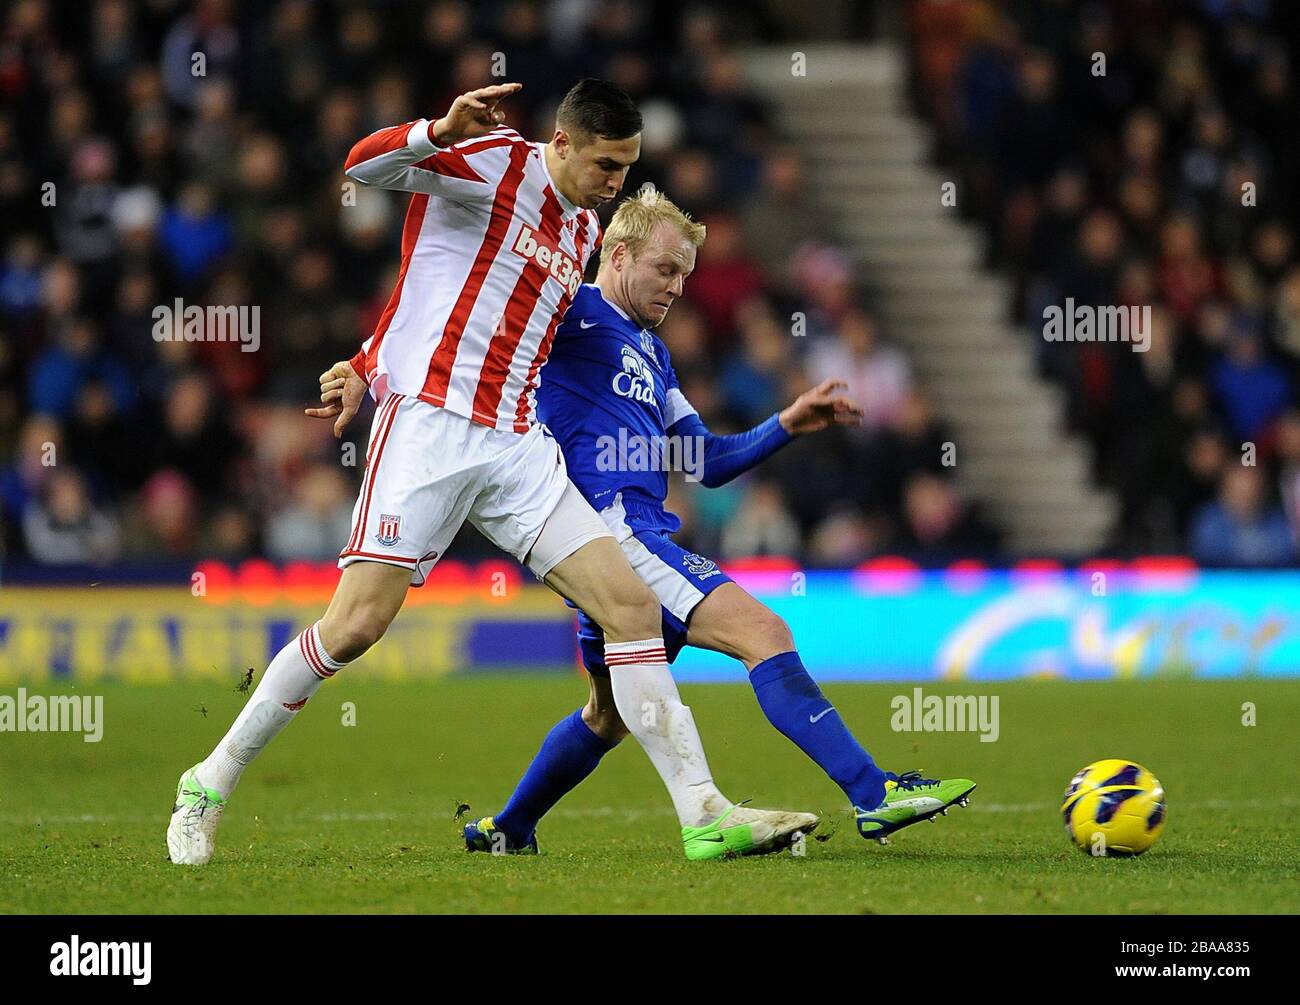 Everton's Steven Naismith (right) and Stoke City's Geoff Cameron battle for the ball Stock Photo